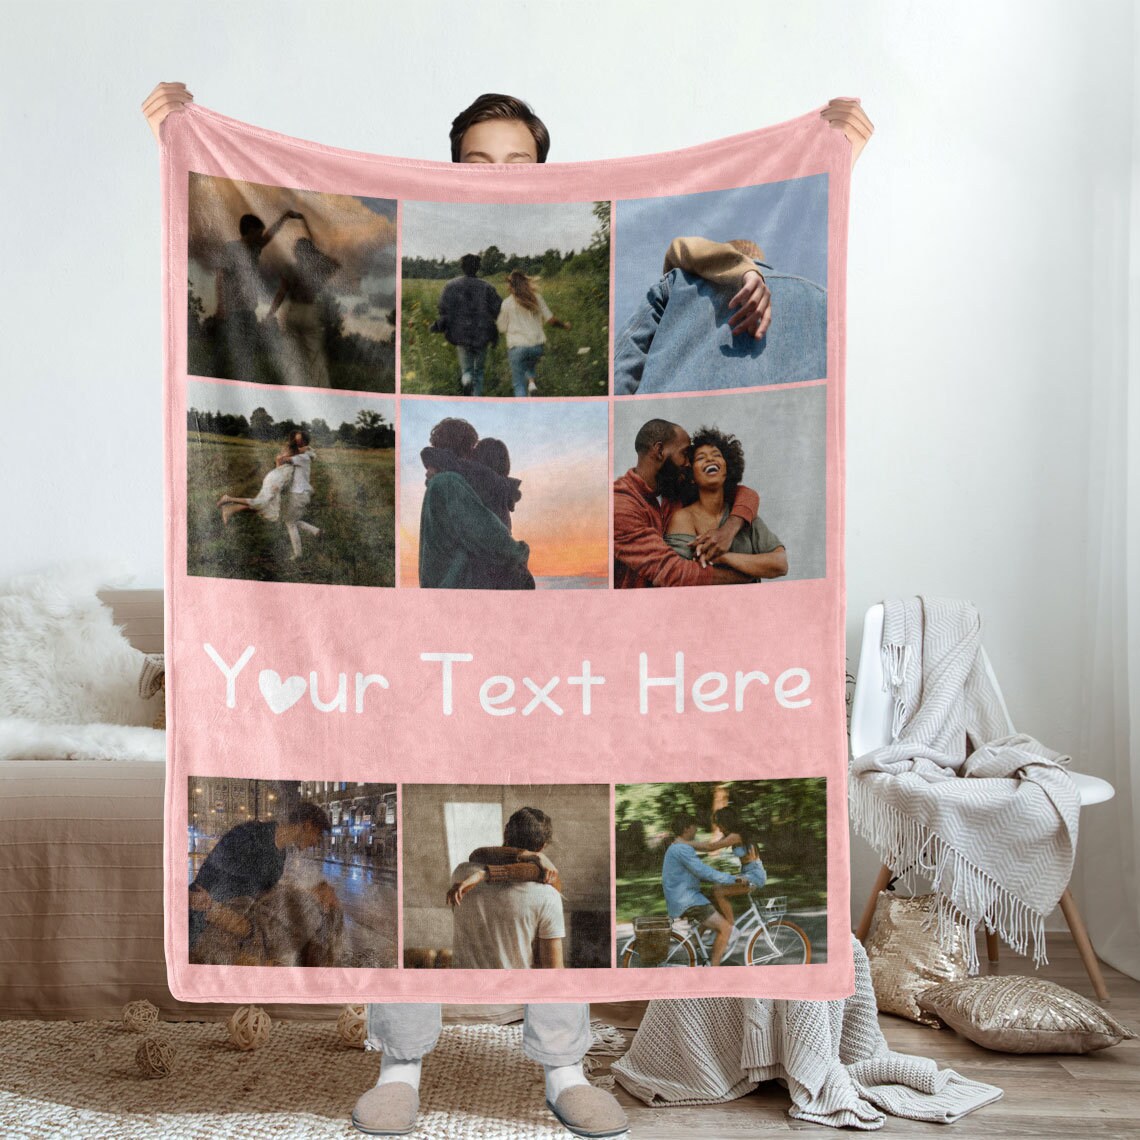 Best Mom Ever Custom Photo Collage, 10 Pictures, Customizable Text Blanket